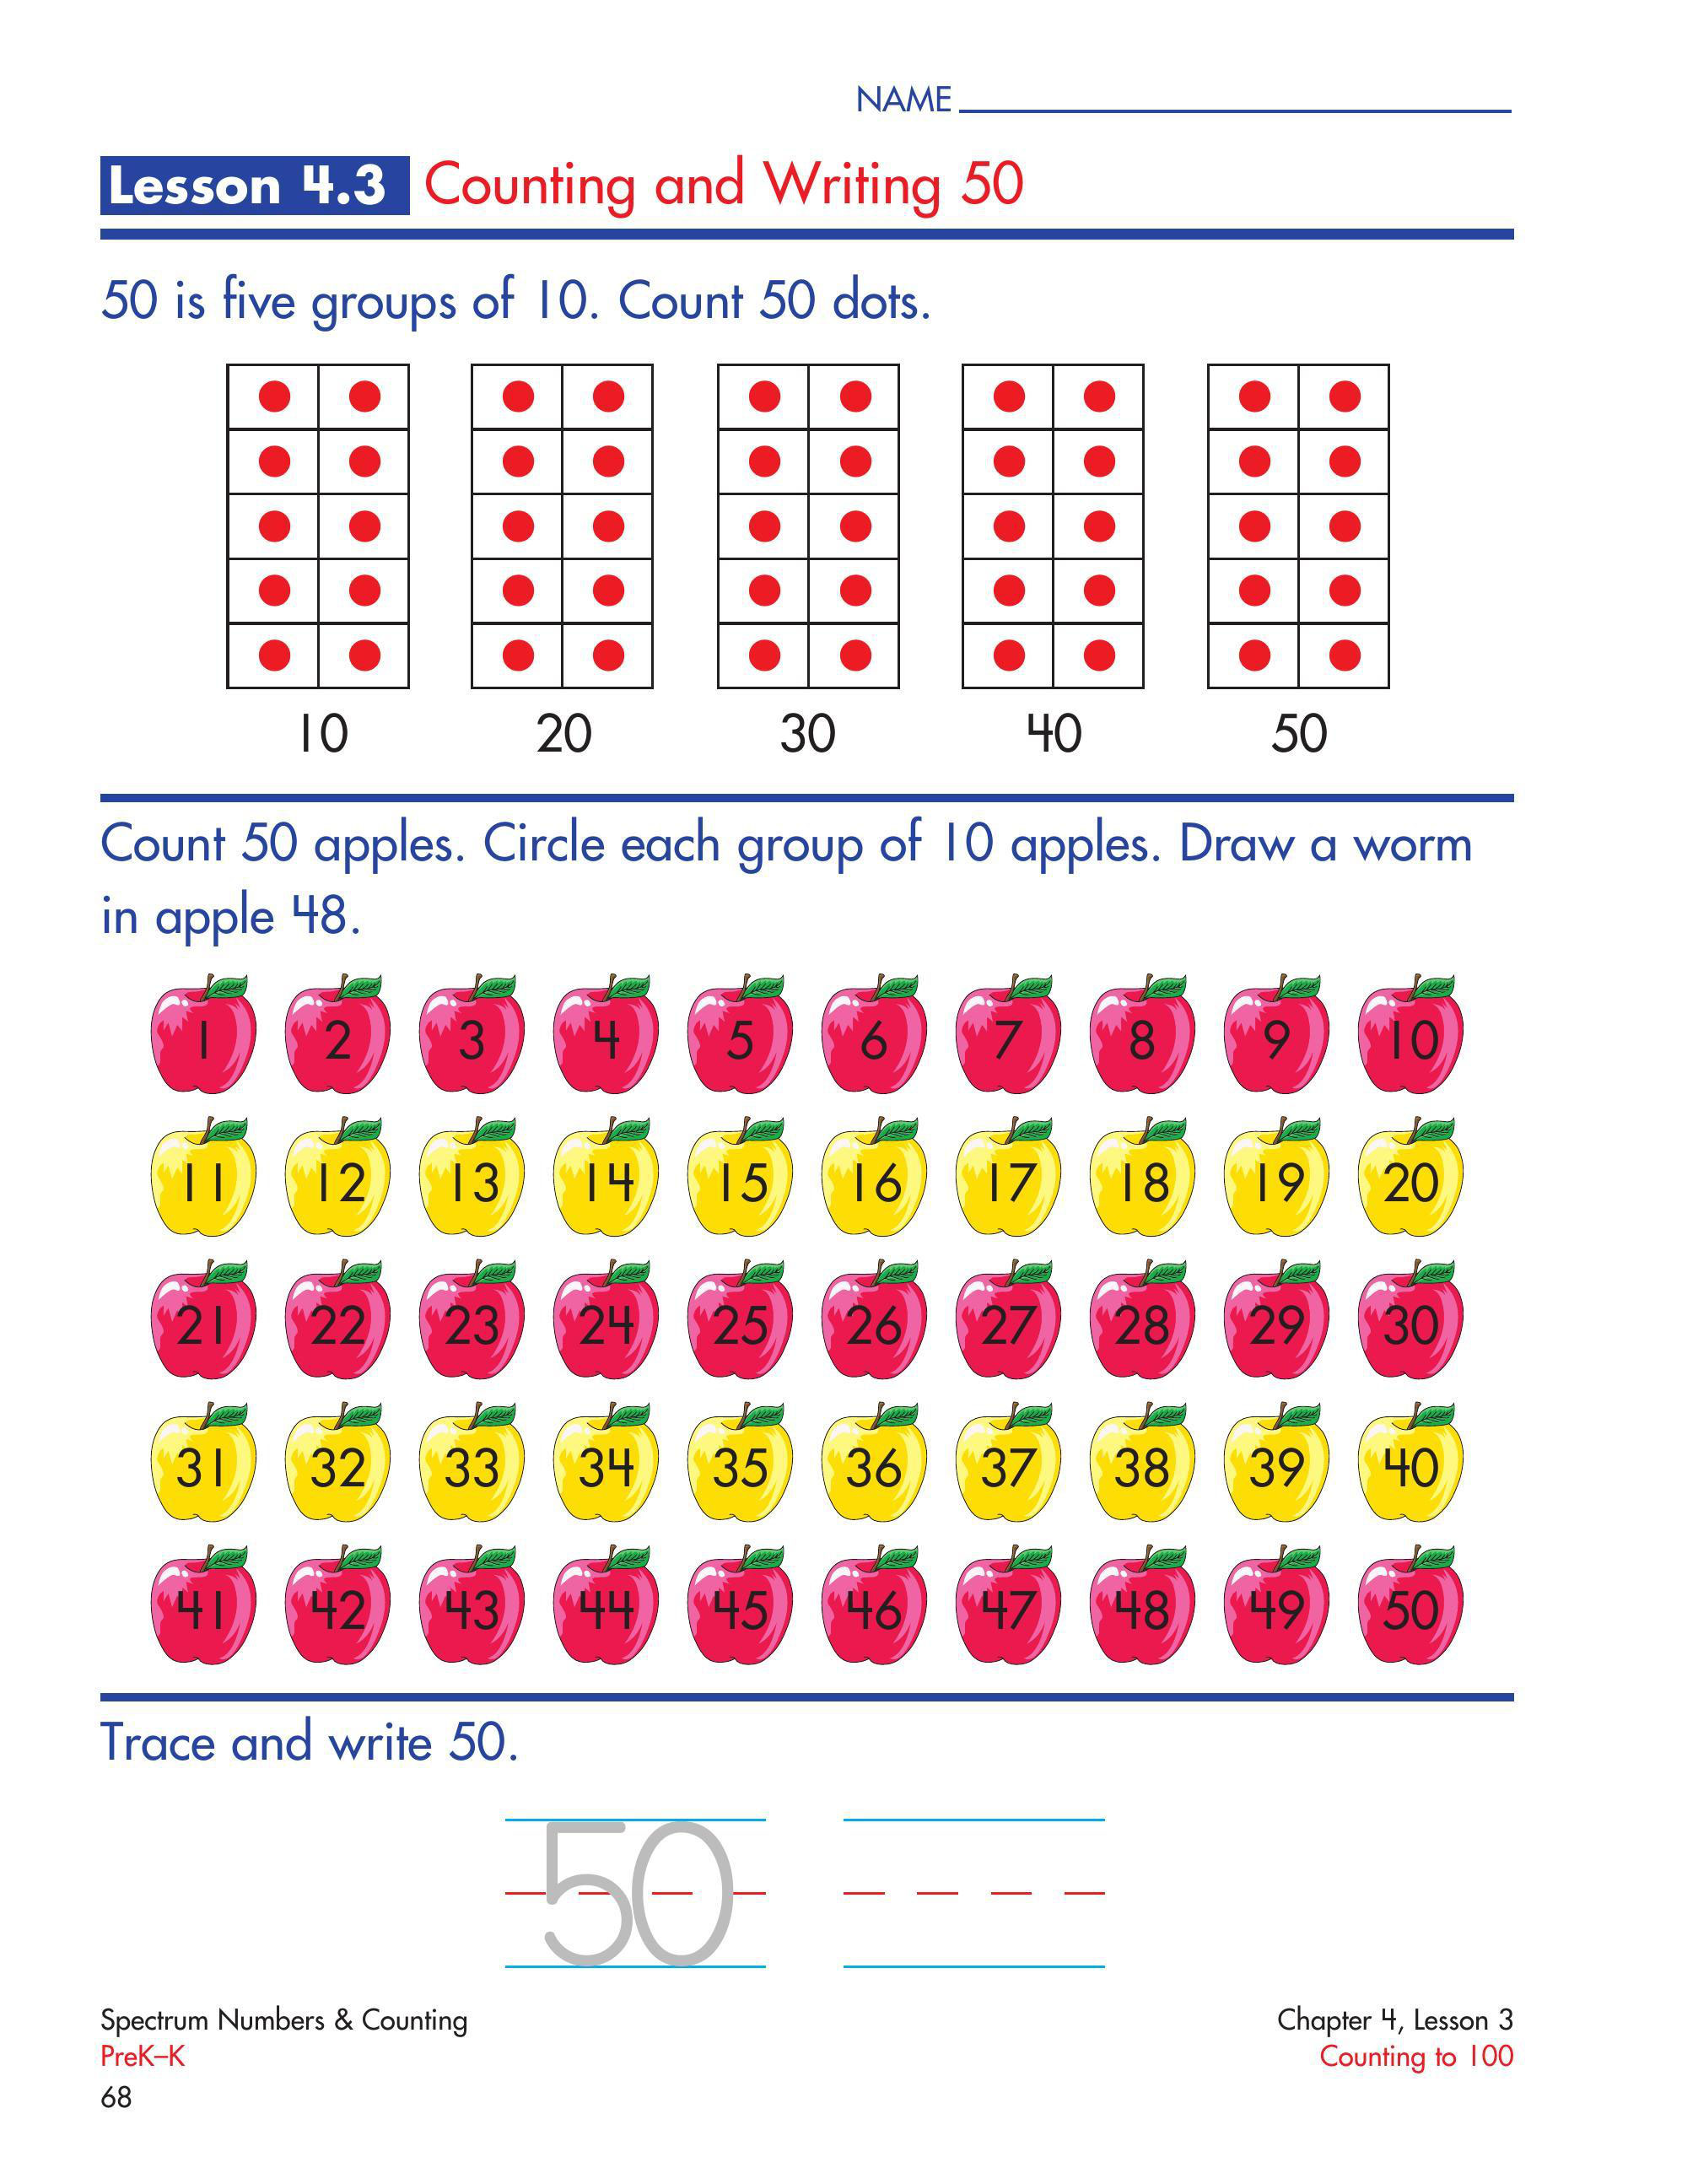 Numbers & Counting, Grades PK   K (68)